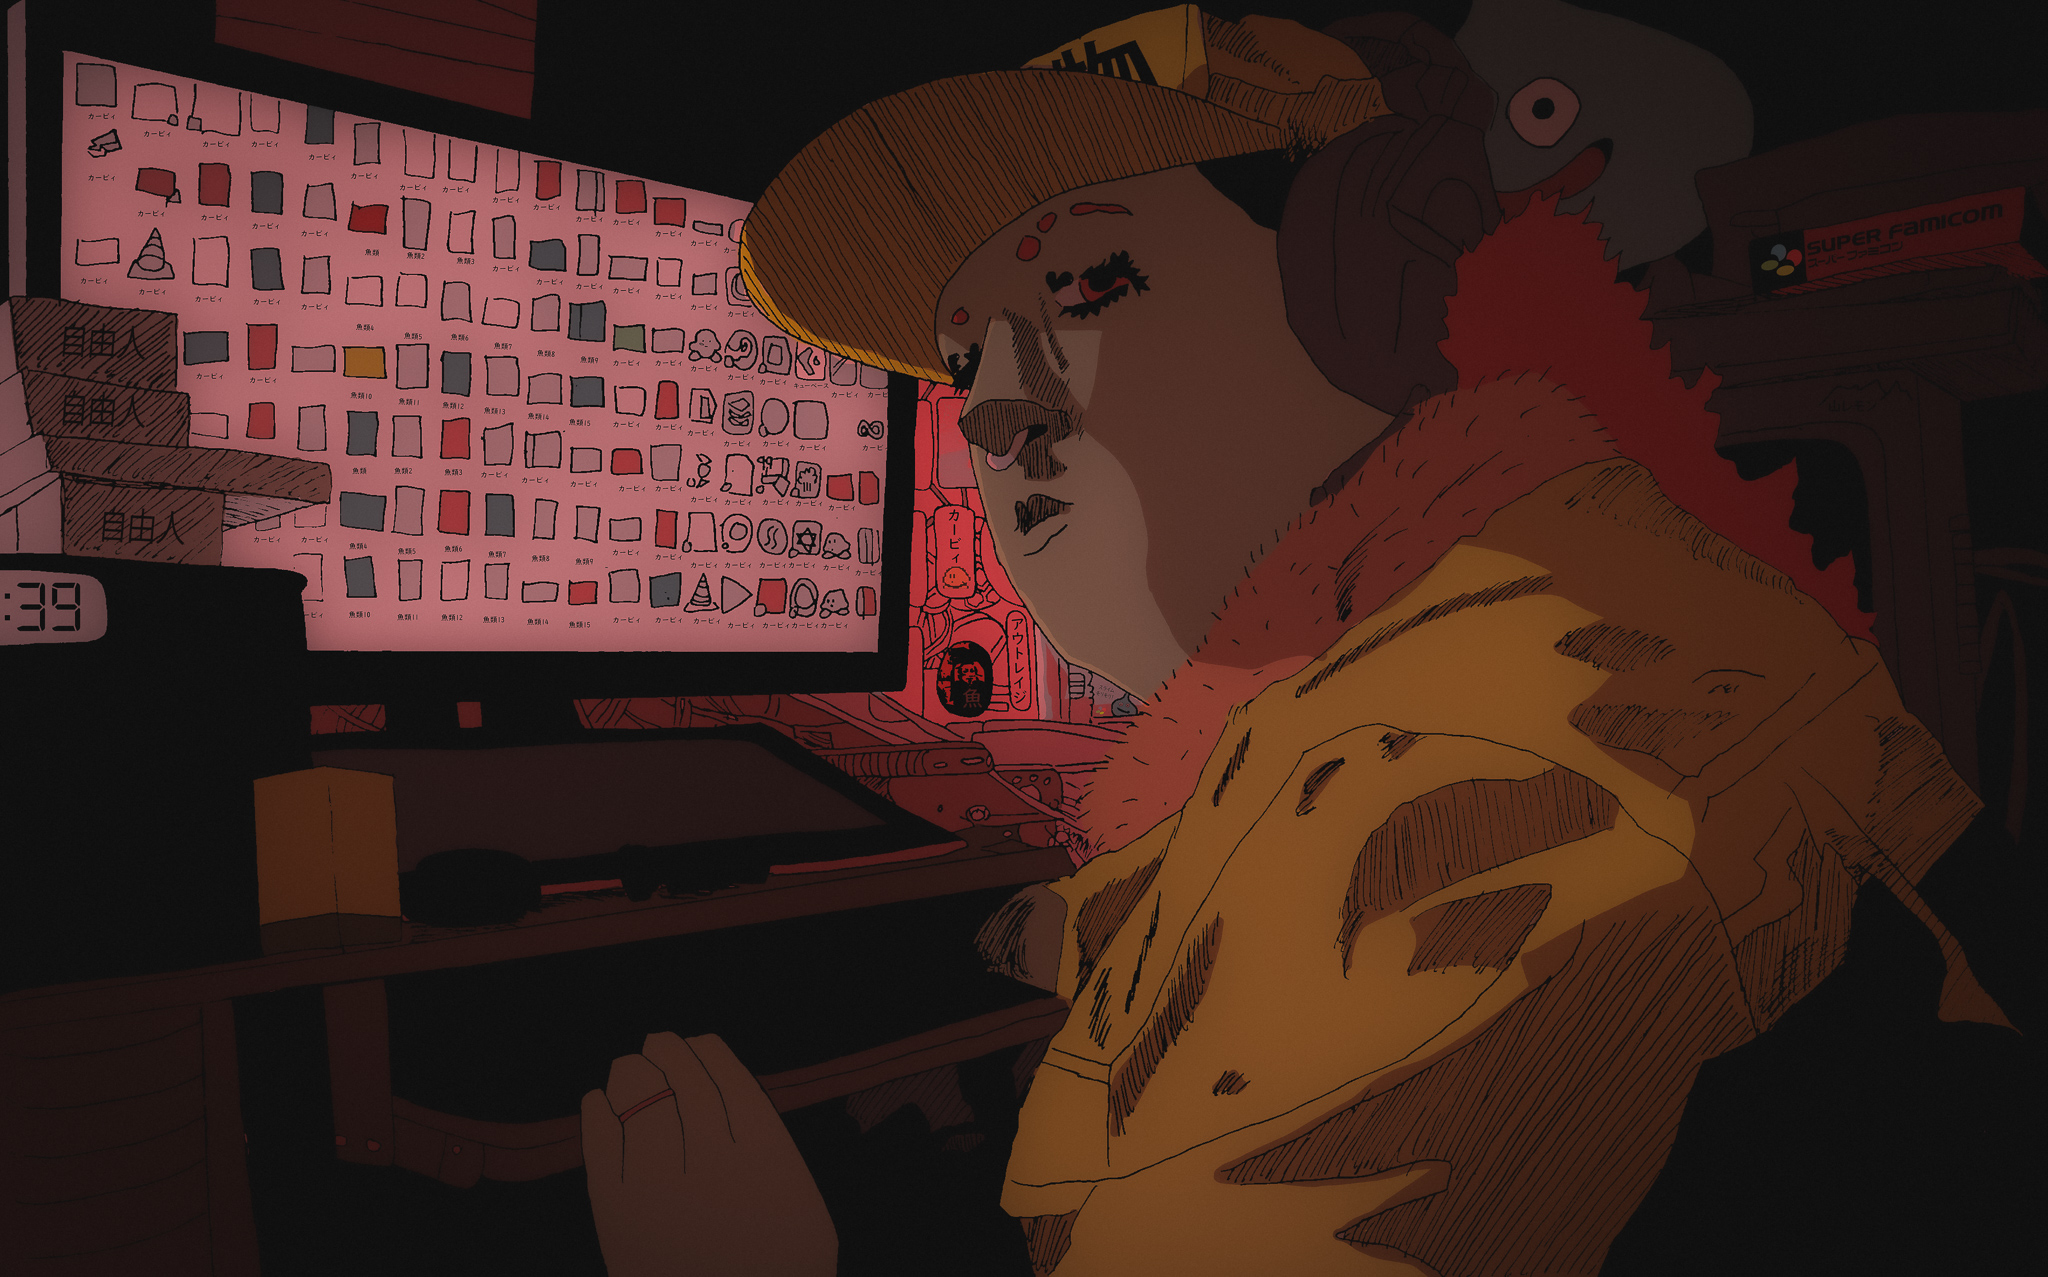 a drawing of a goblin sittng in front of a computer surrounded by other electronics in a dark room, the lighting is very moody with stark shadows from the glow of the computer monitor, the colors are warm